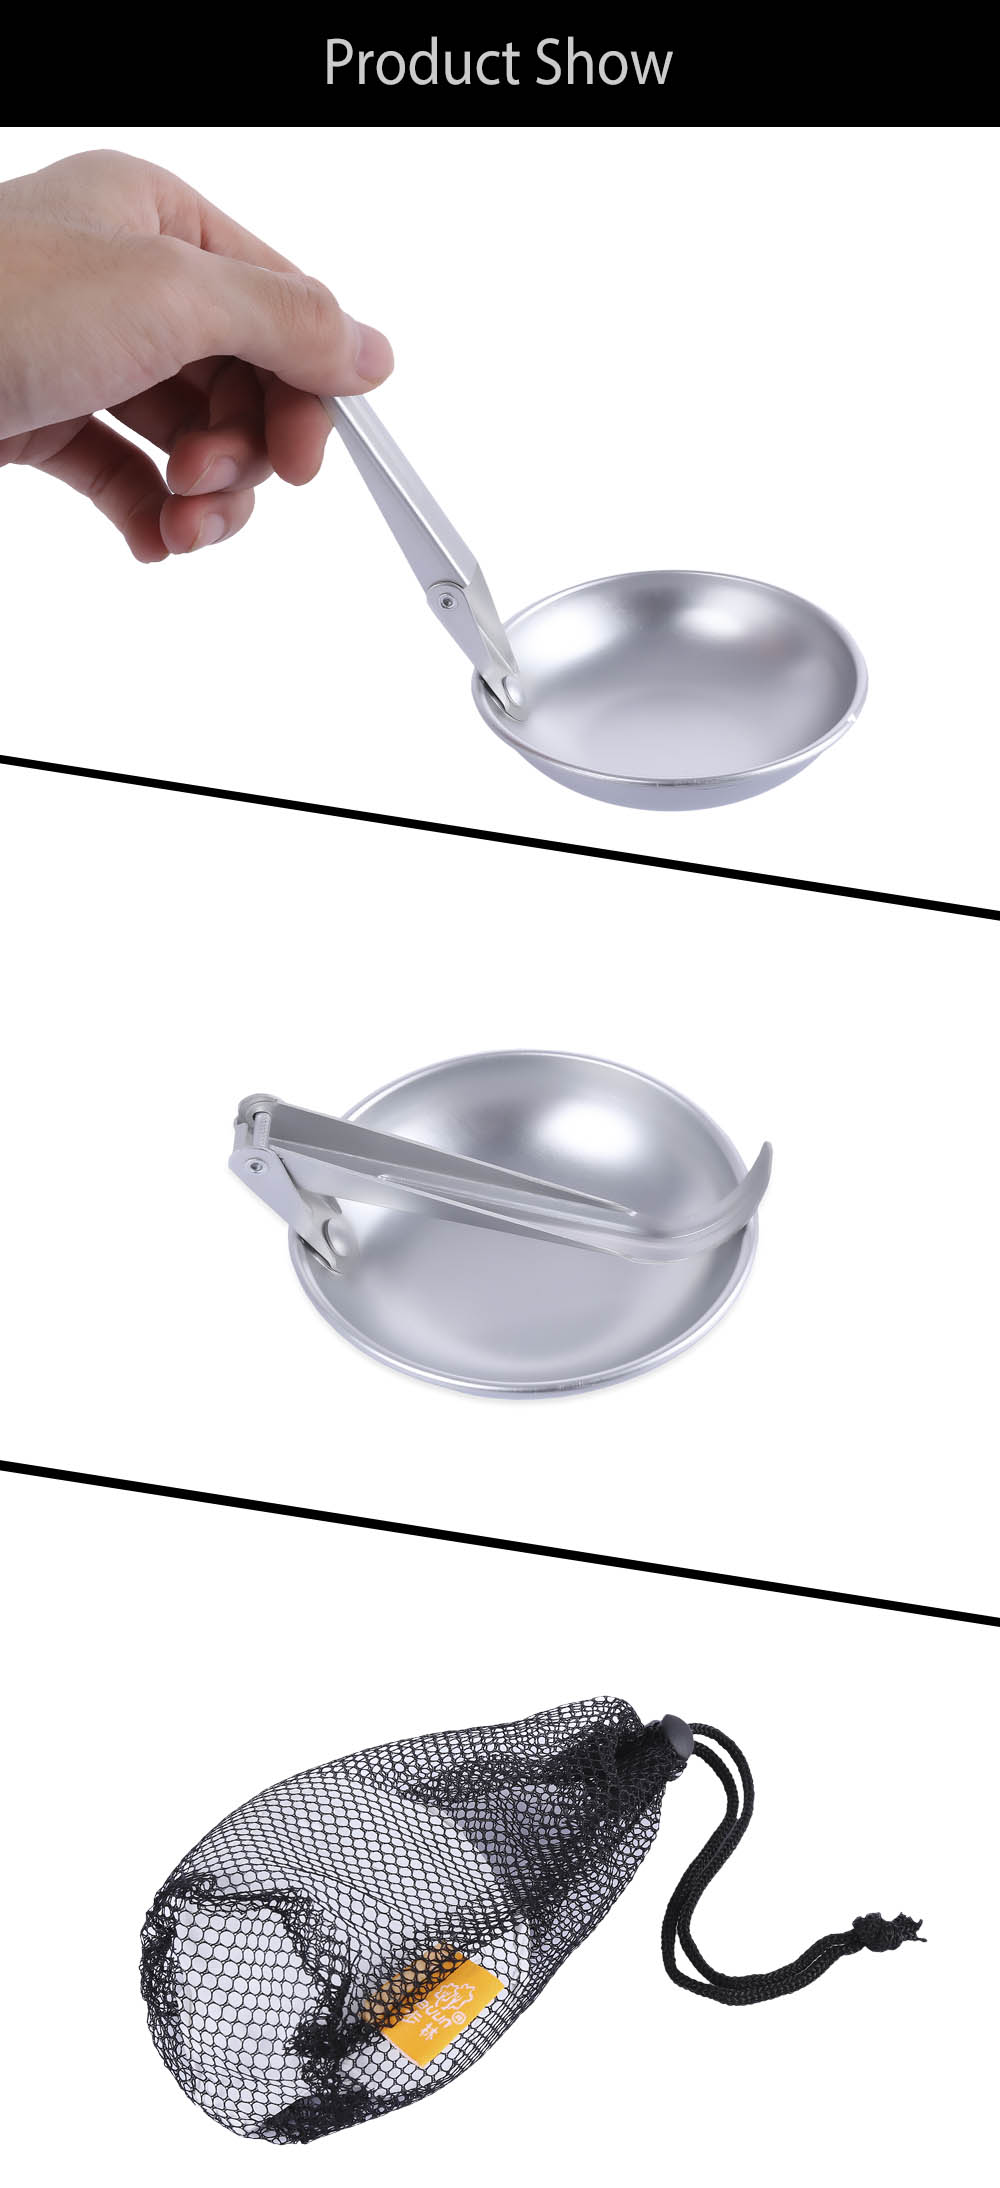 BULIN BL600 - D7 Picnic Folding Tableware Spoon Soup Ladle with Carrying Bag Outdoor Camping Traveling Survival Equipment